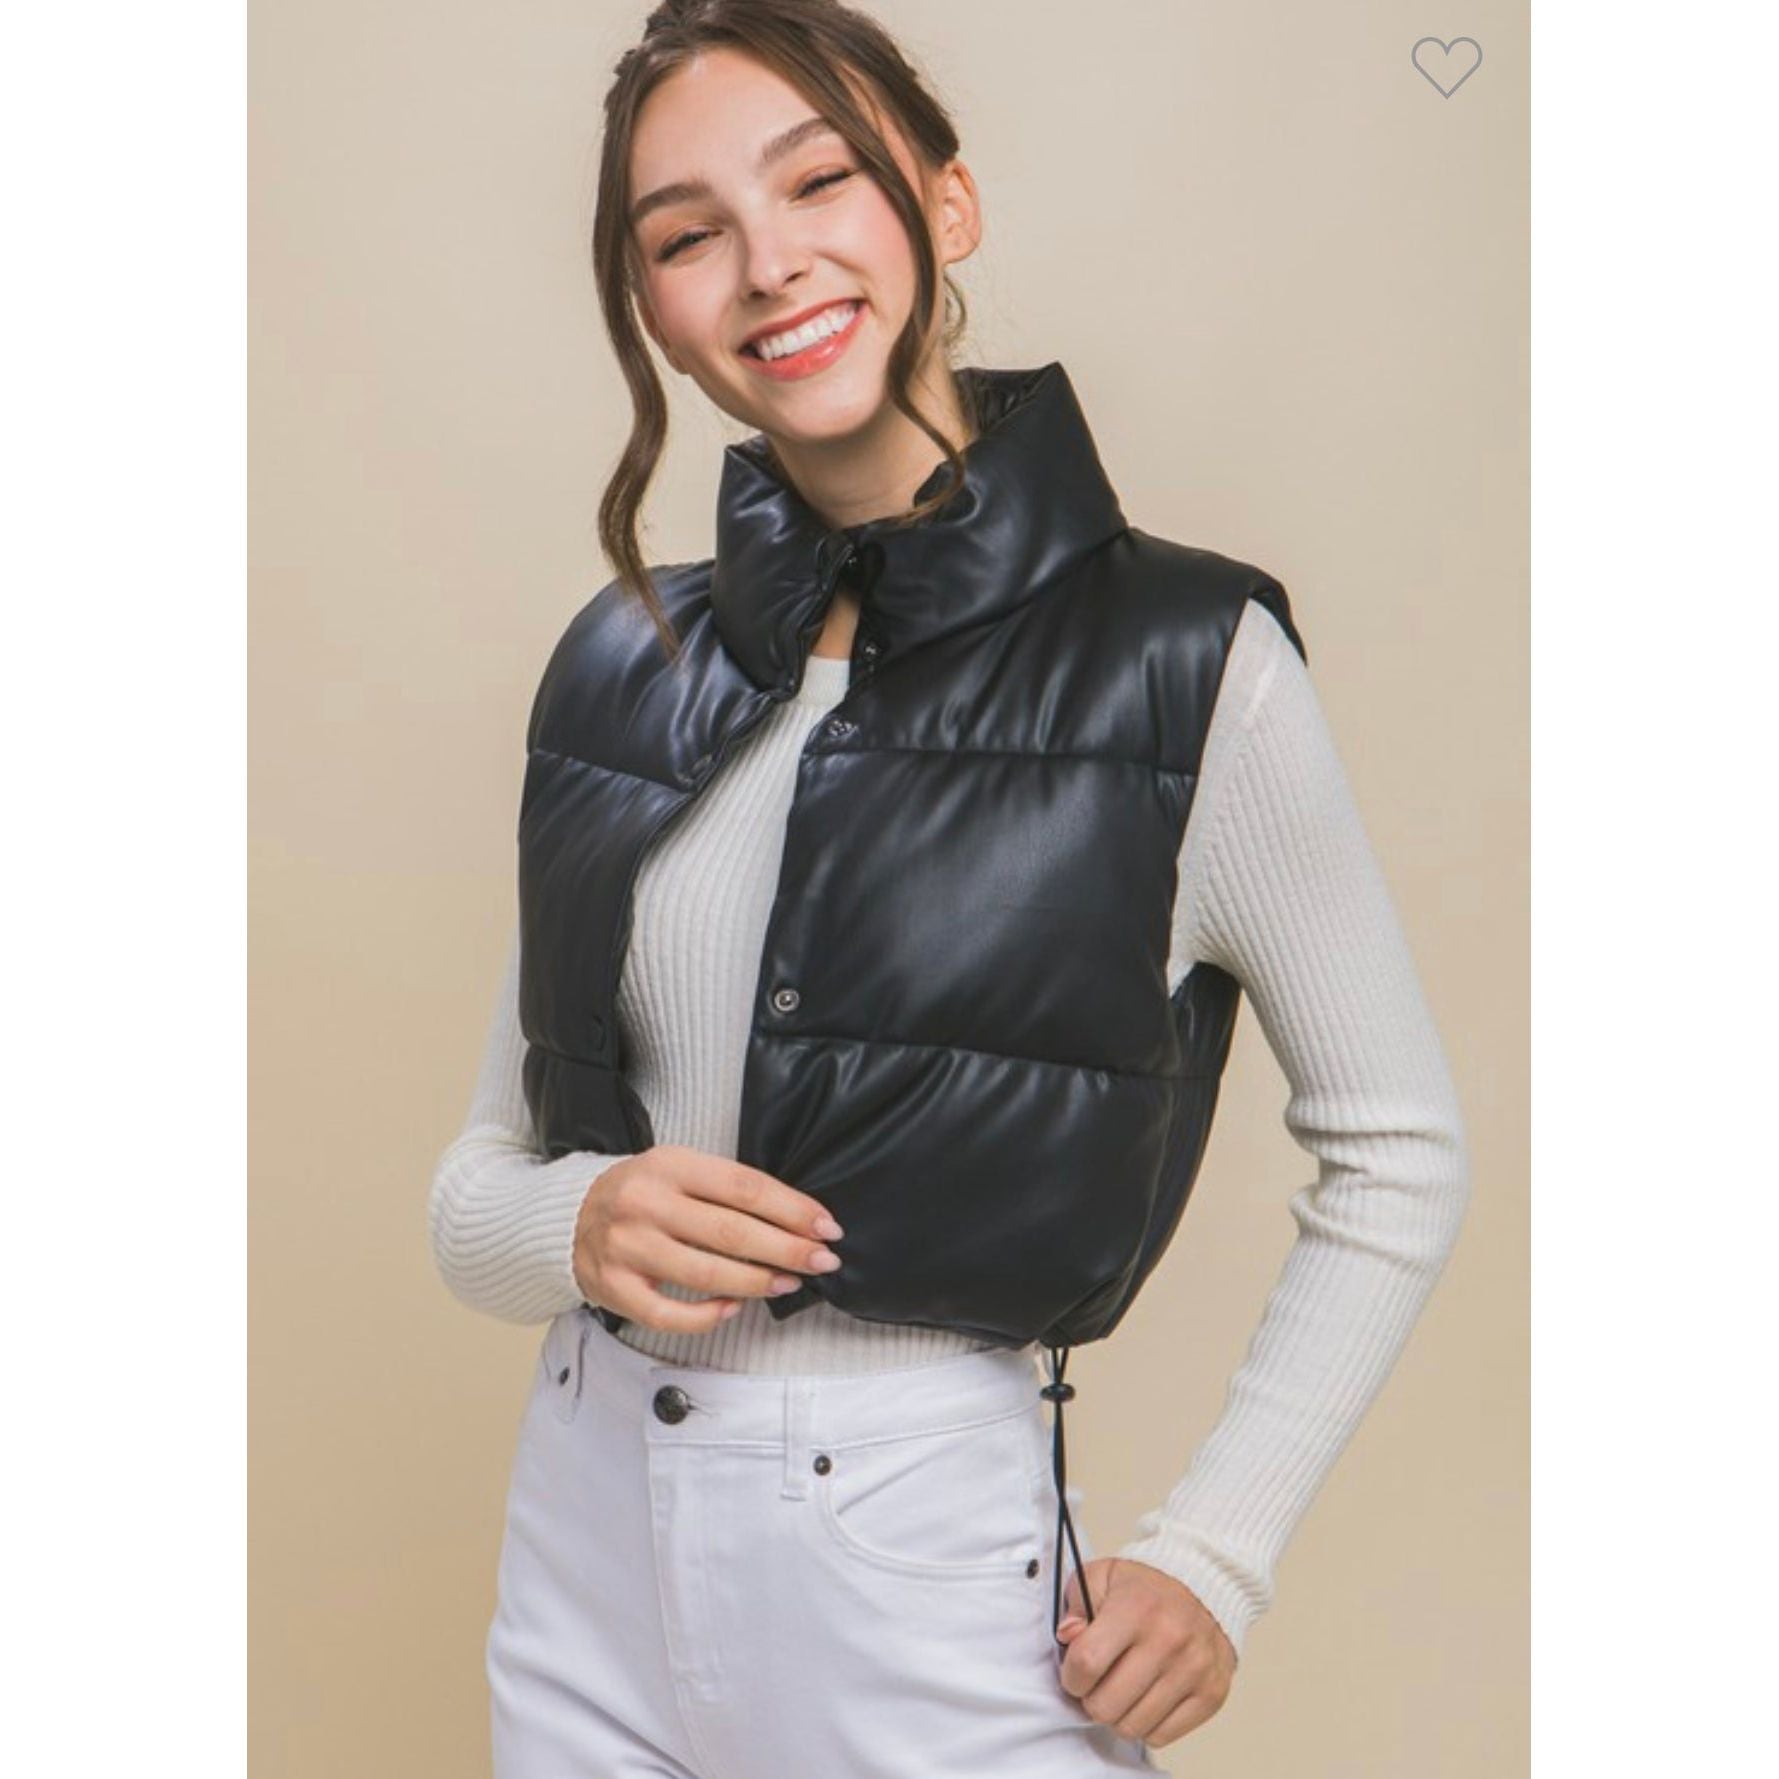 Leather Puffer Vest